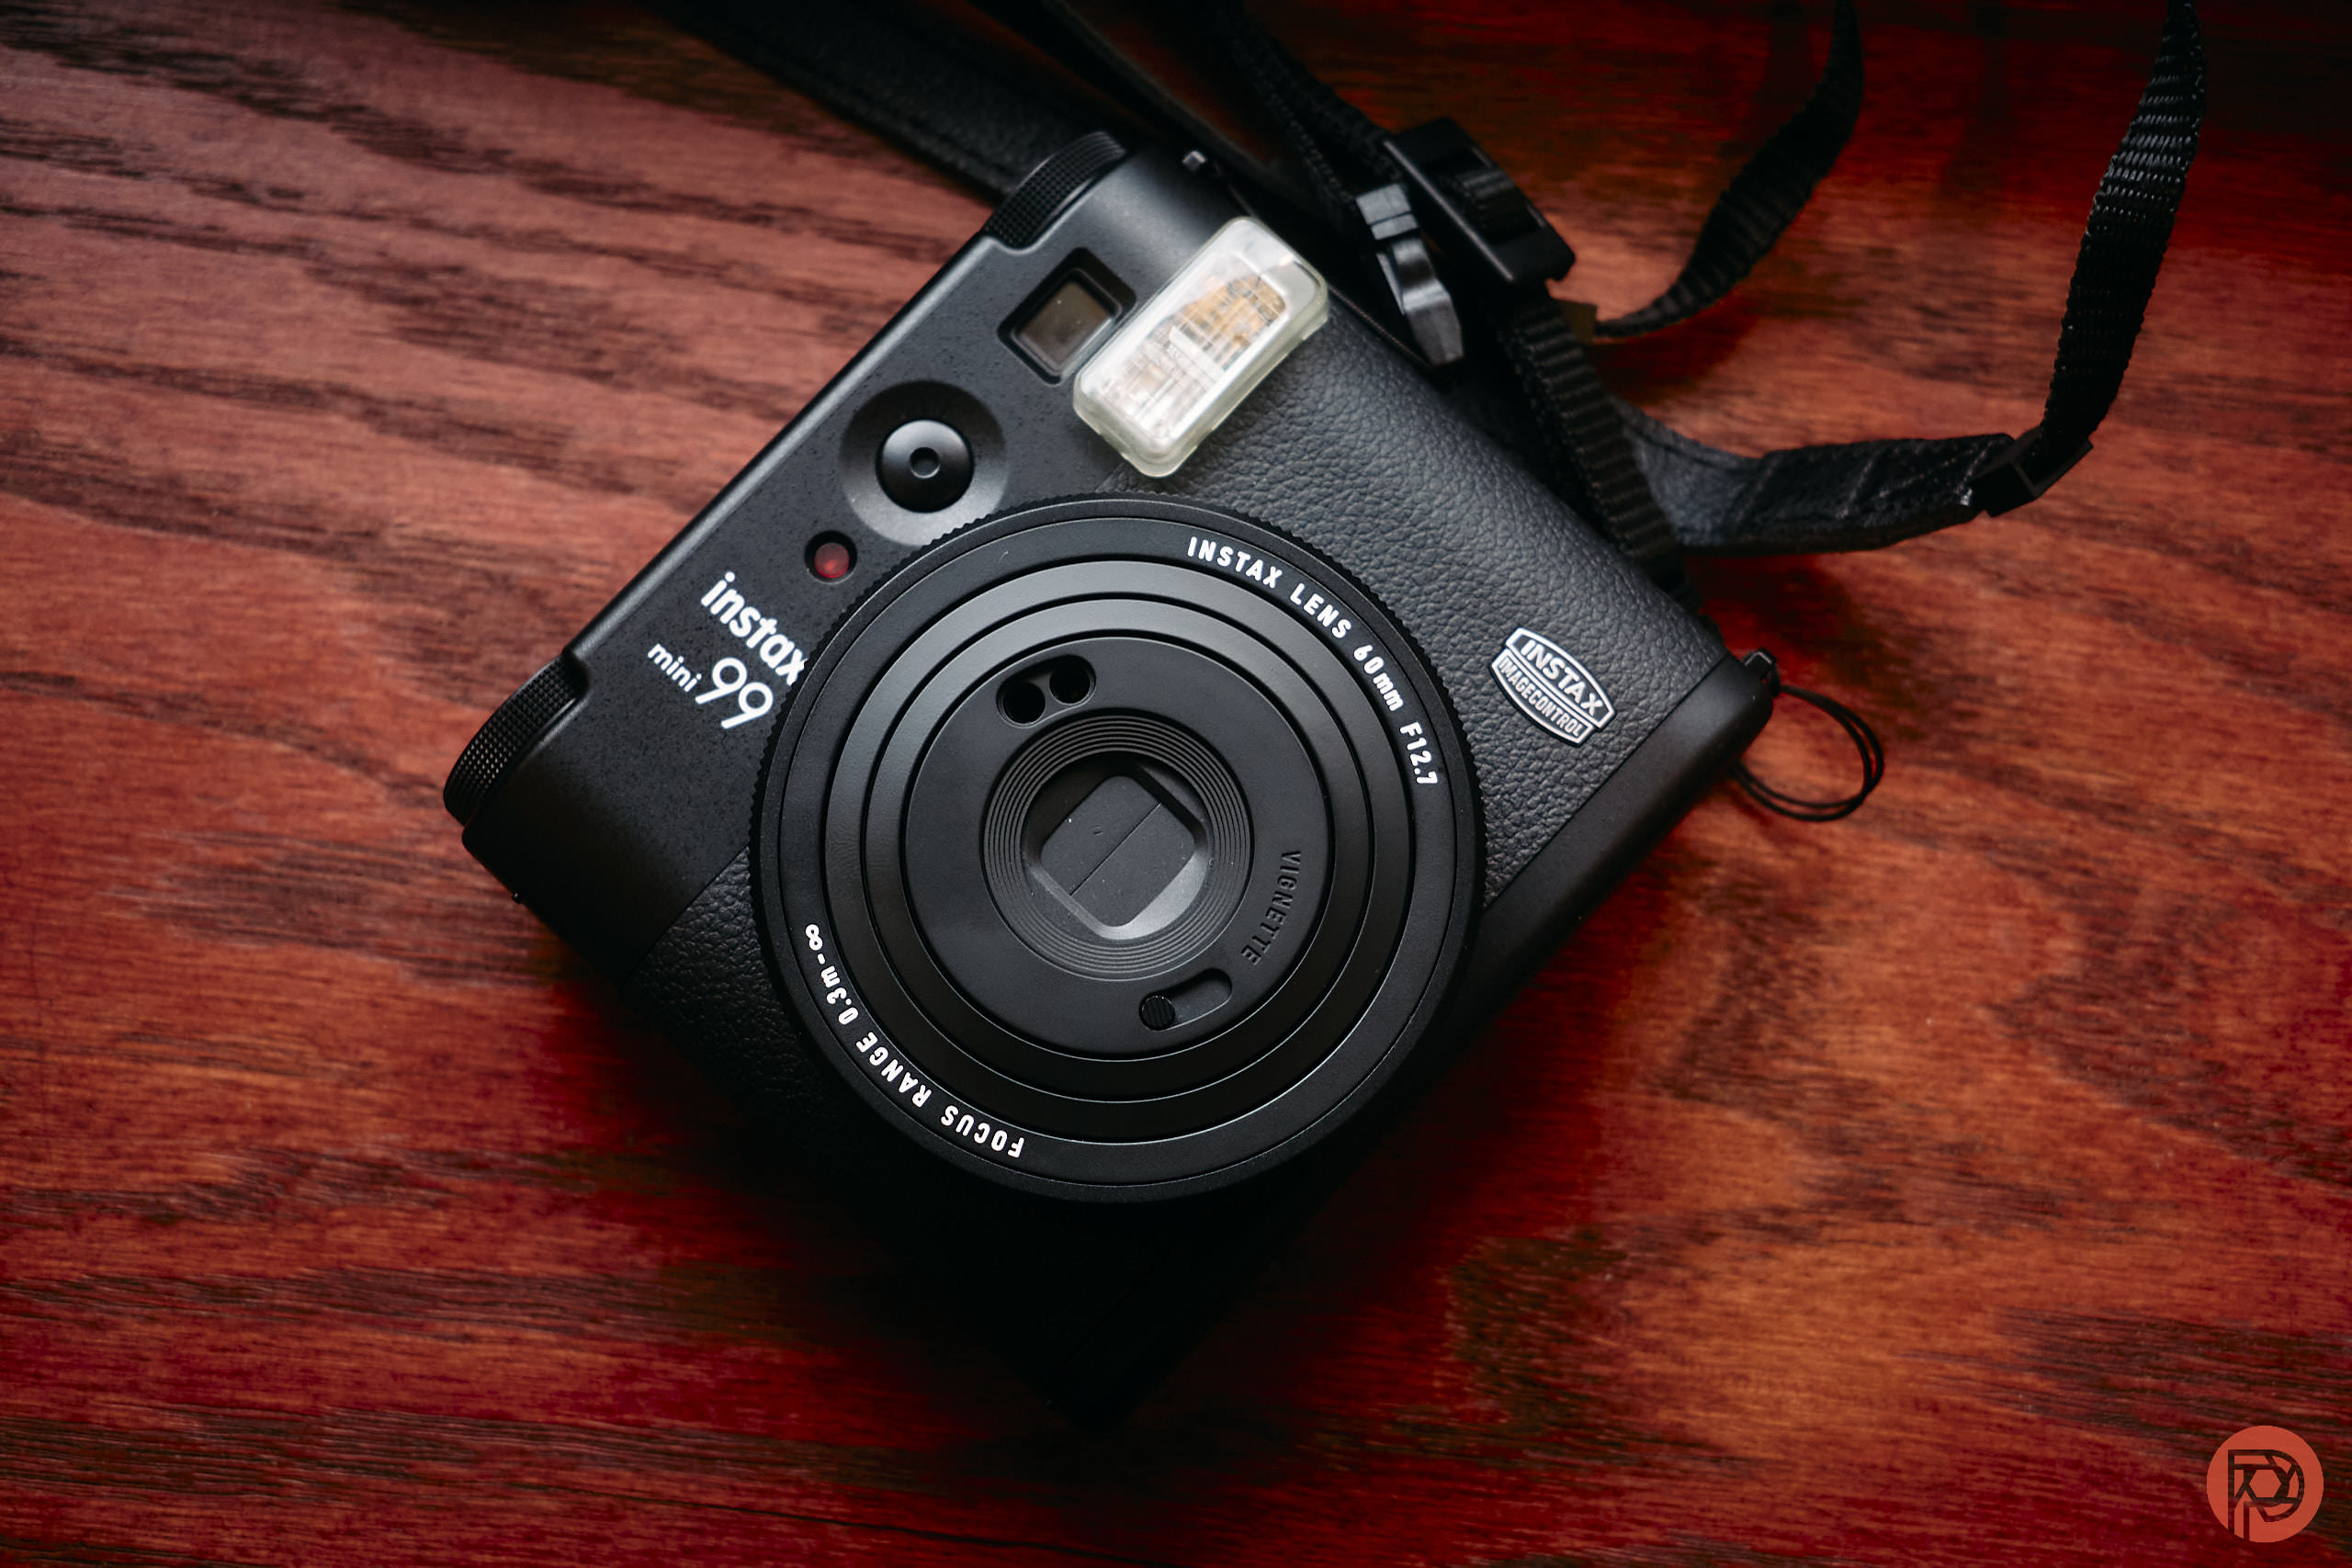 https://www.thephoblographer.com/wp-content/uploads/2024/03/Chris-Gampat-The-Phoblographer-Fujifilm-Instax-Mini-99-review-product-images5.61-30s400.jpg